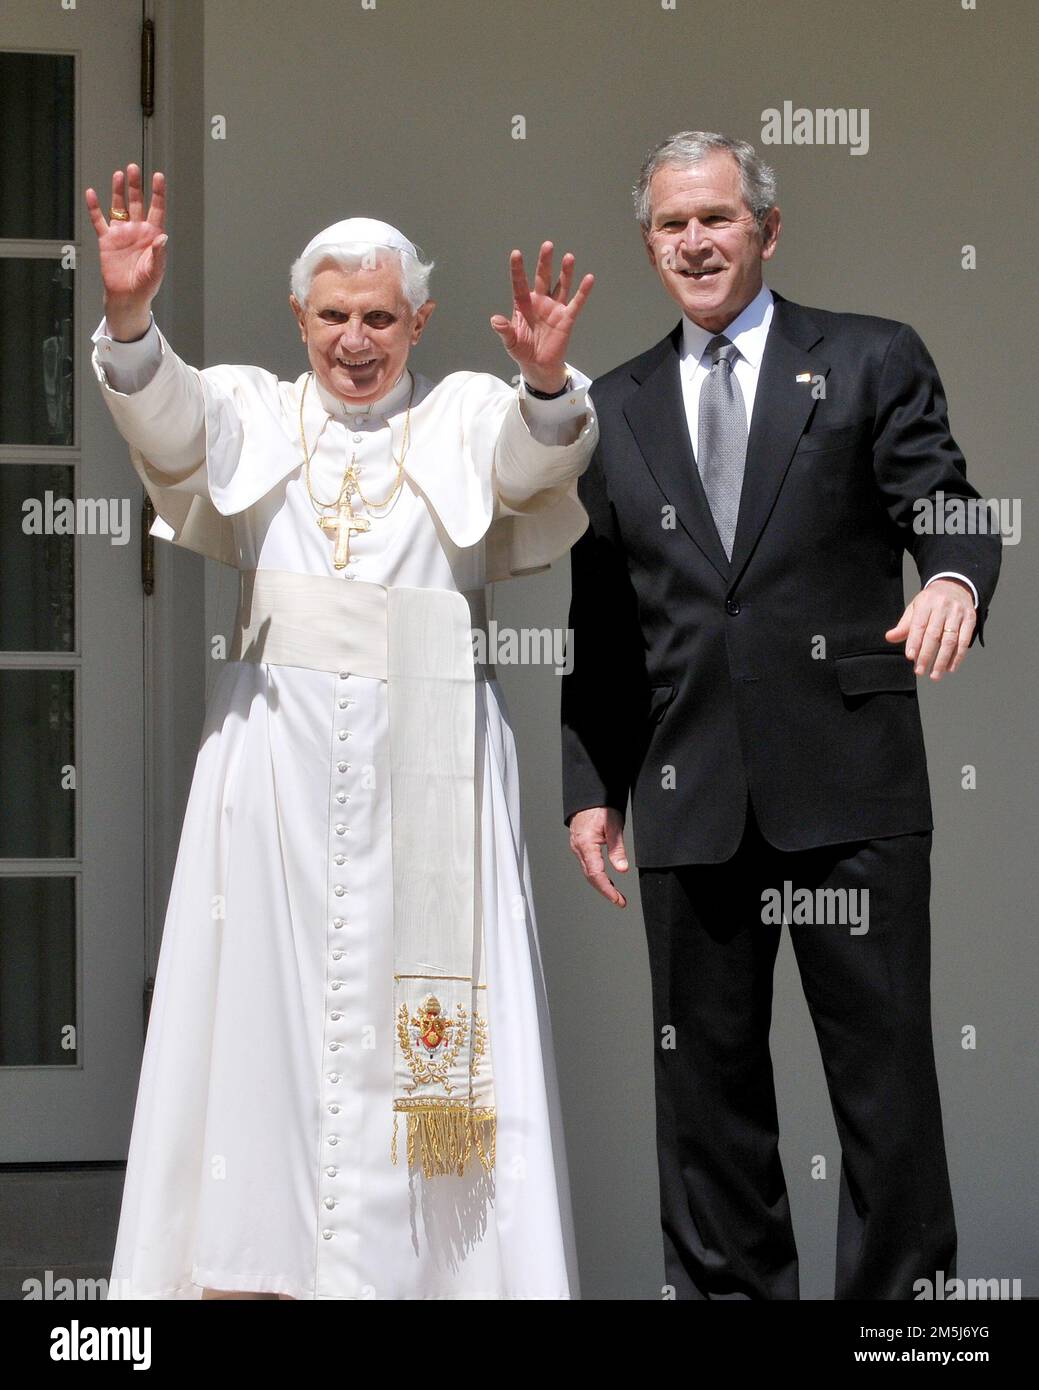 Pope Benedict XVI raises his hands as United States President George W. Bush stop to pose for photographers as they walk along the Colonnade at the White House in Washington, D.C. on Wednesday, April 16, 2008.  .Credit: Ron Sachs / CNP.(RESTRICTION: NO New York or New Jersey Newspapers or newspapers within a 75 mile radius of New York City) / MediaPunch Stock Photo